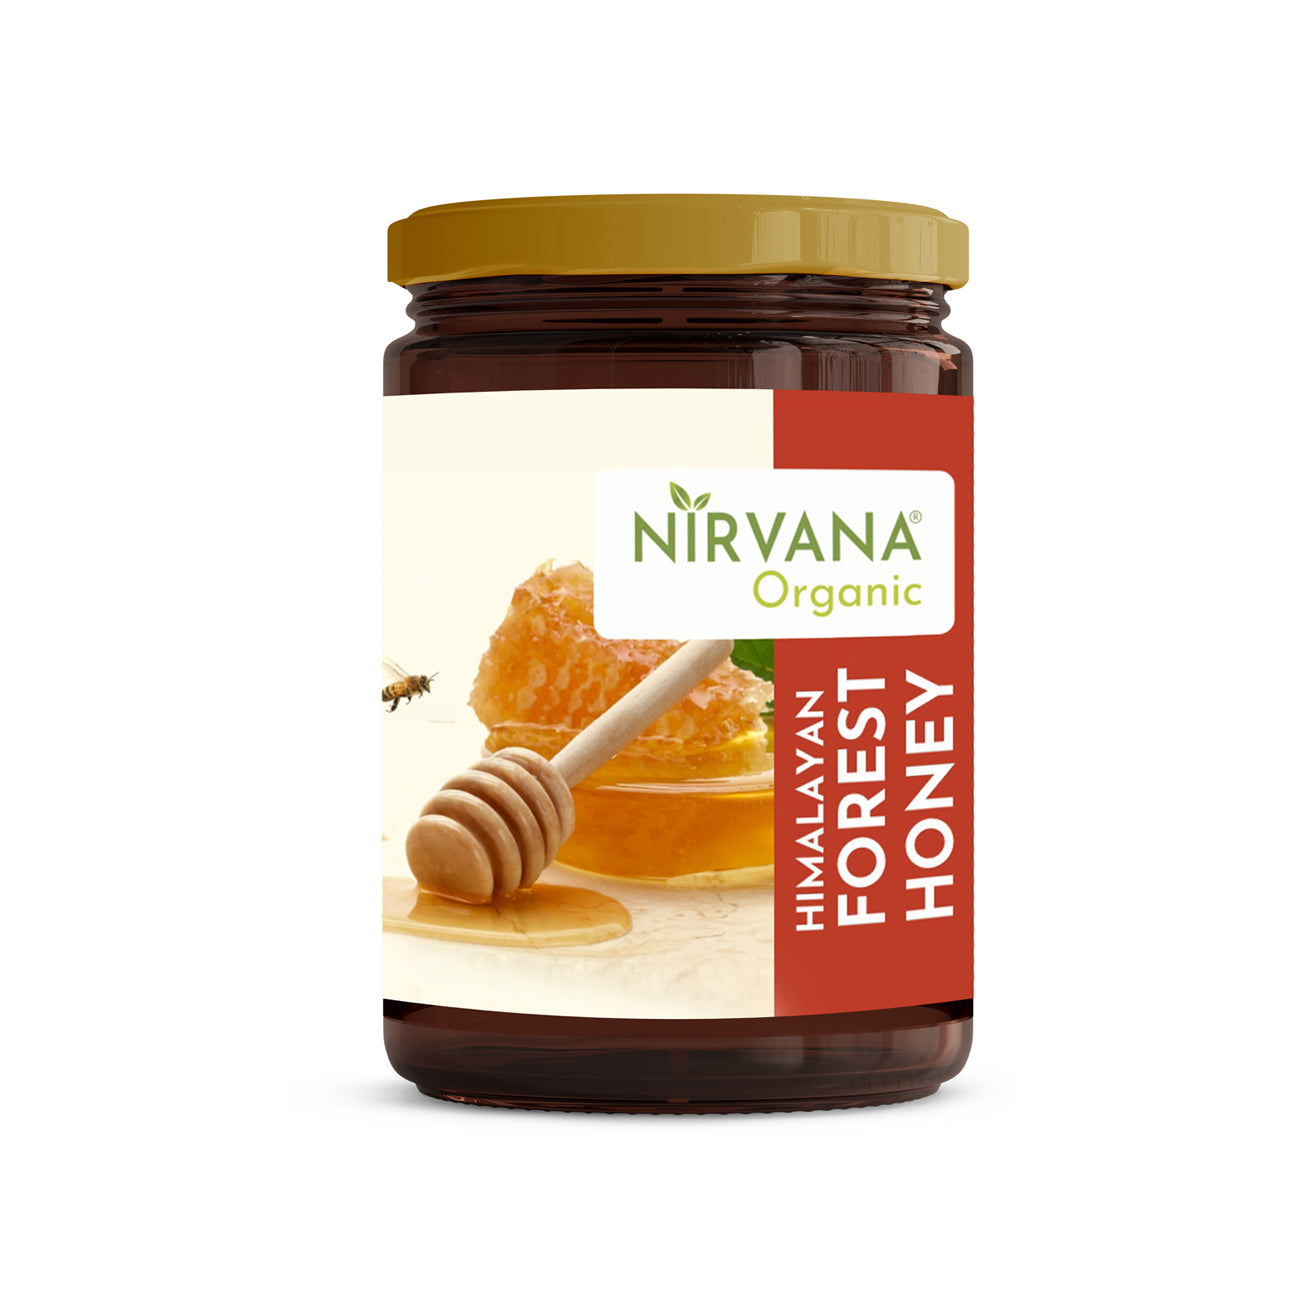 Himalayan Forest Honey